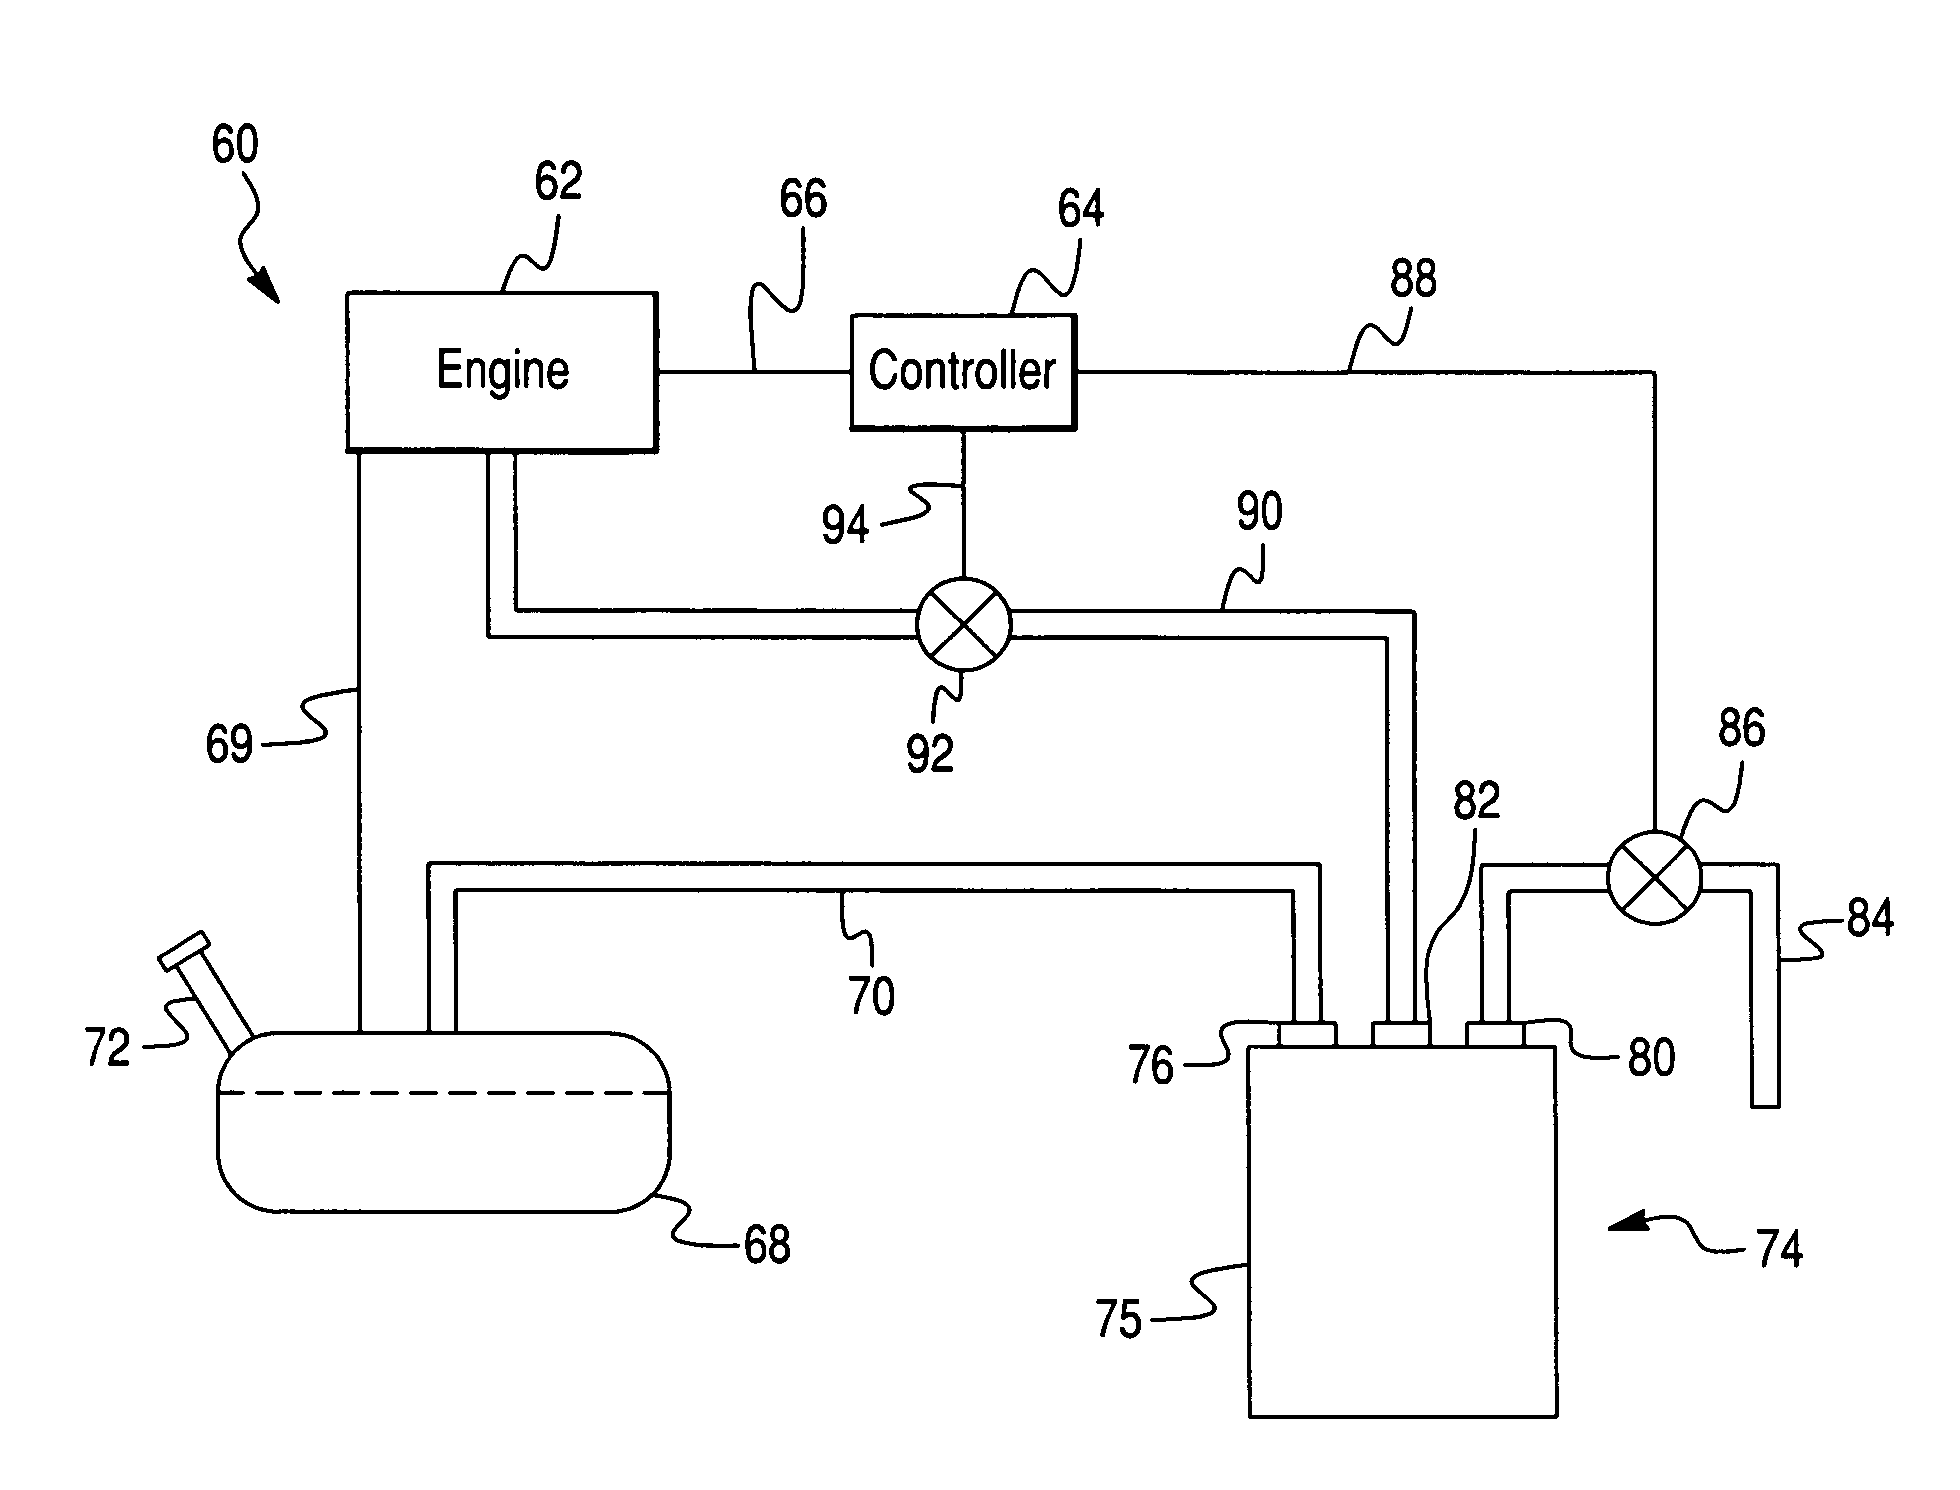 Hydrocarbon adsorption method and device for controlling evaporative emissions from the fuel storage system of motor vehicles